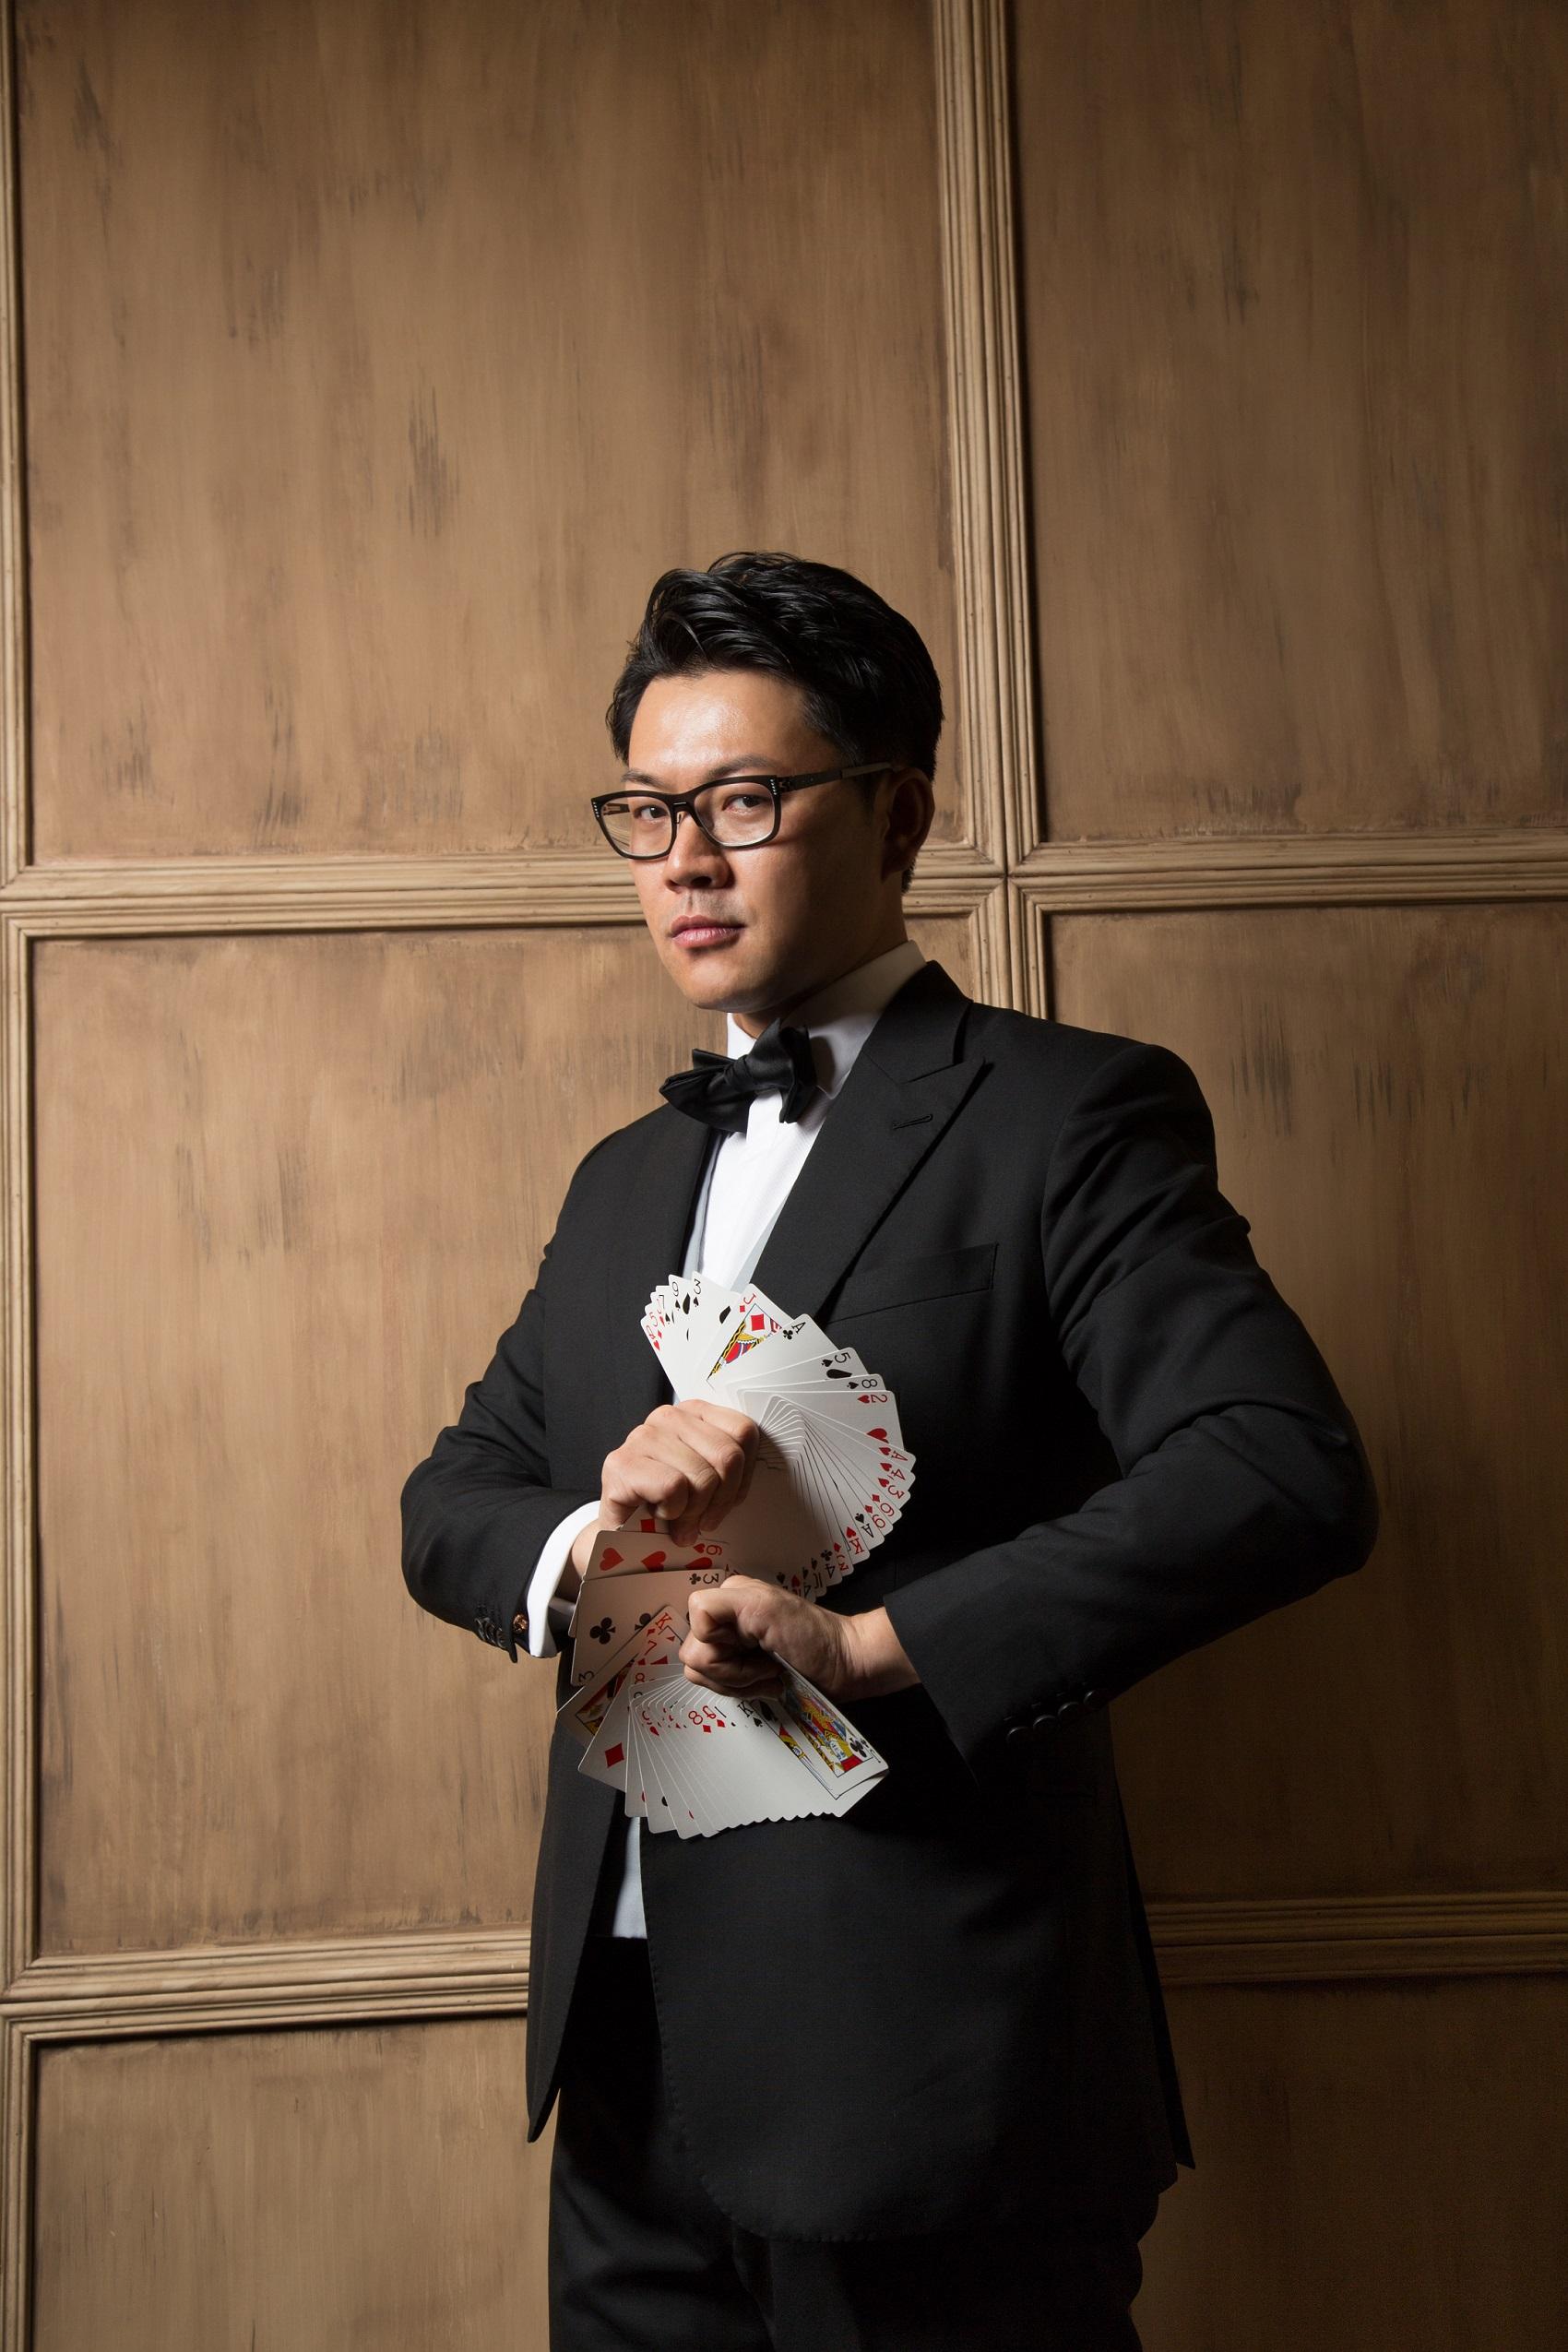 The Leisure and Cultural Services Department will hold a magic performance "In Your Sight, In Your Mind" at six districts from January to March next year. The performances will feature digital magic and mentalism, offering members of the public an opportunity to enjoy the art of magic visually and mentally. Members of the public are welcome to join and admission is free. Photo shows local magician Zenneth Kok who is the performer of the show.